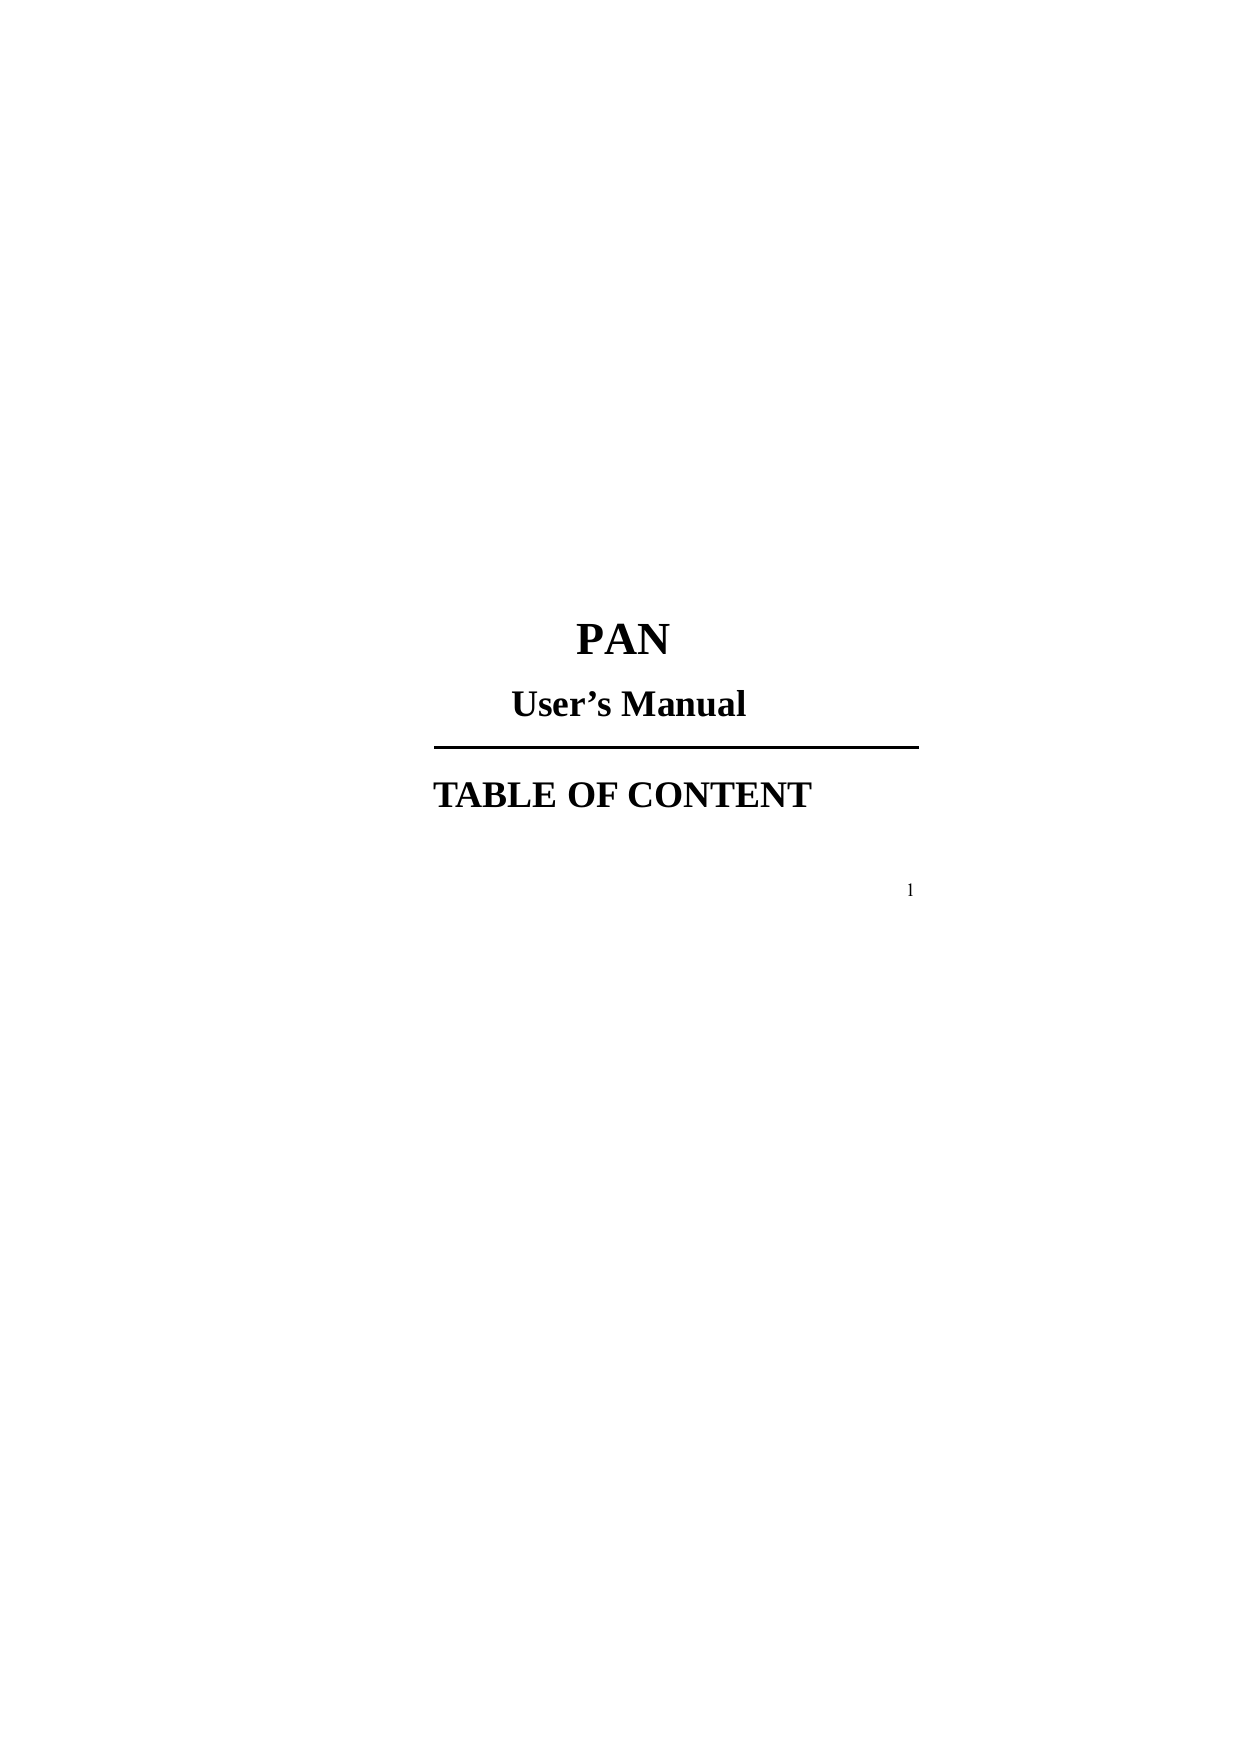   1              PAN User’s Manual        TABLE OF CONTENT 